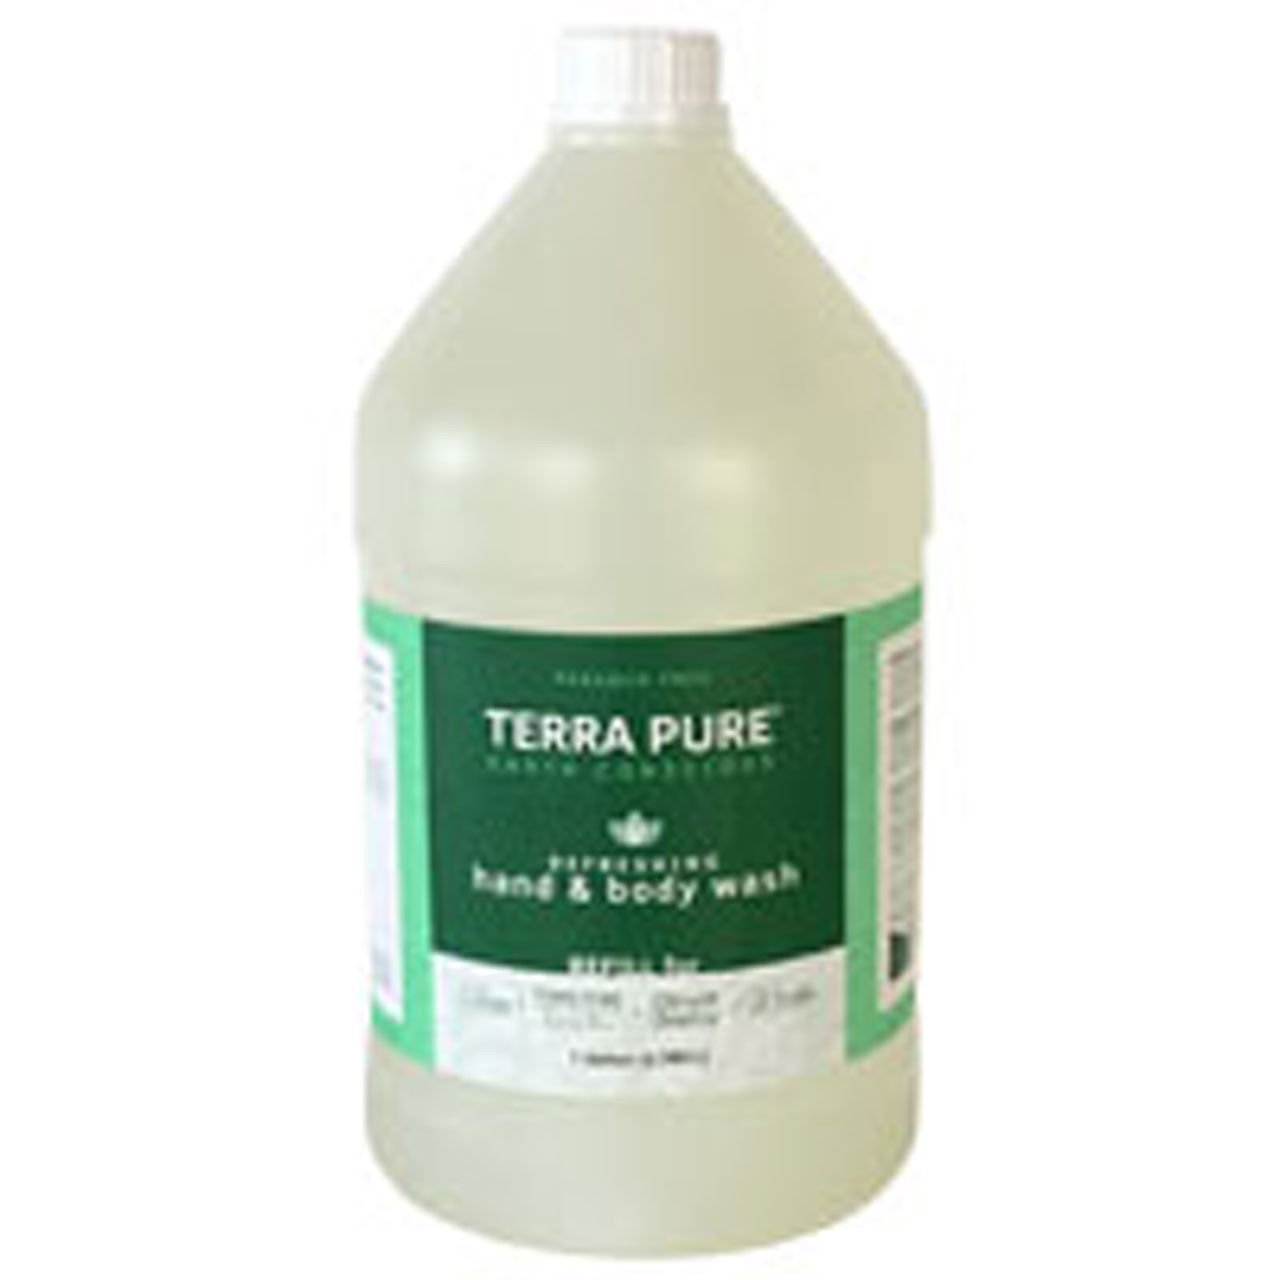 What are the features of the TERRA PURE GREEN TEA BULK?